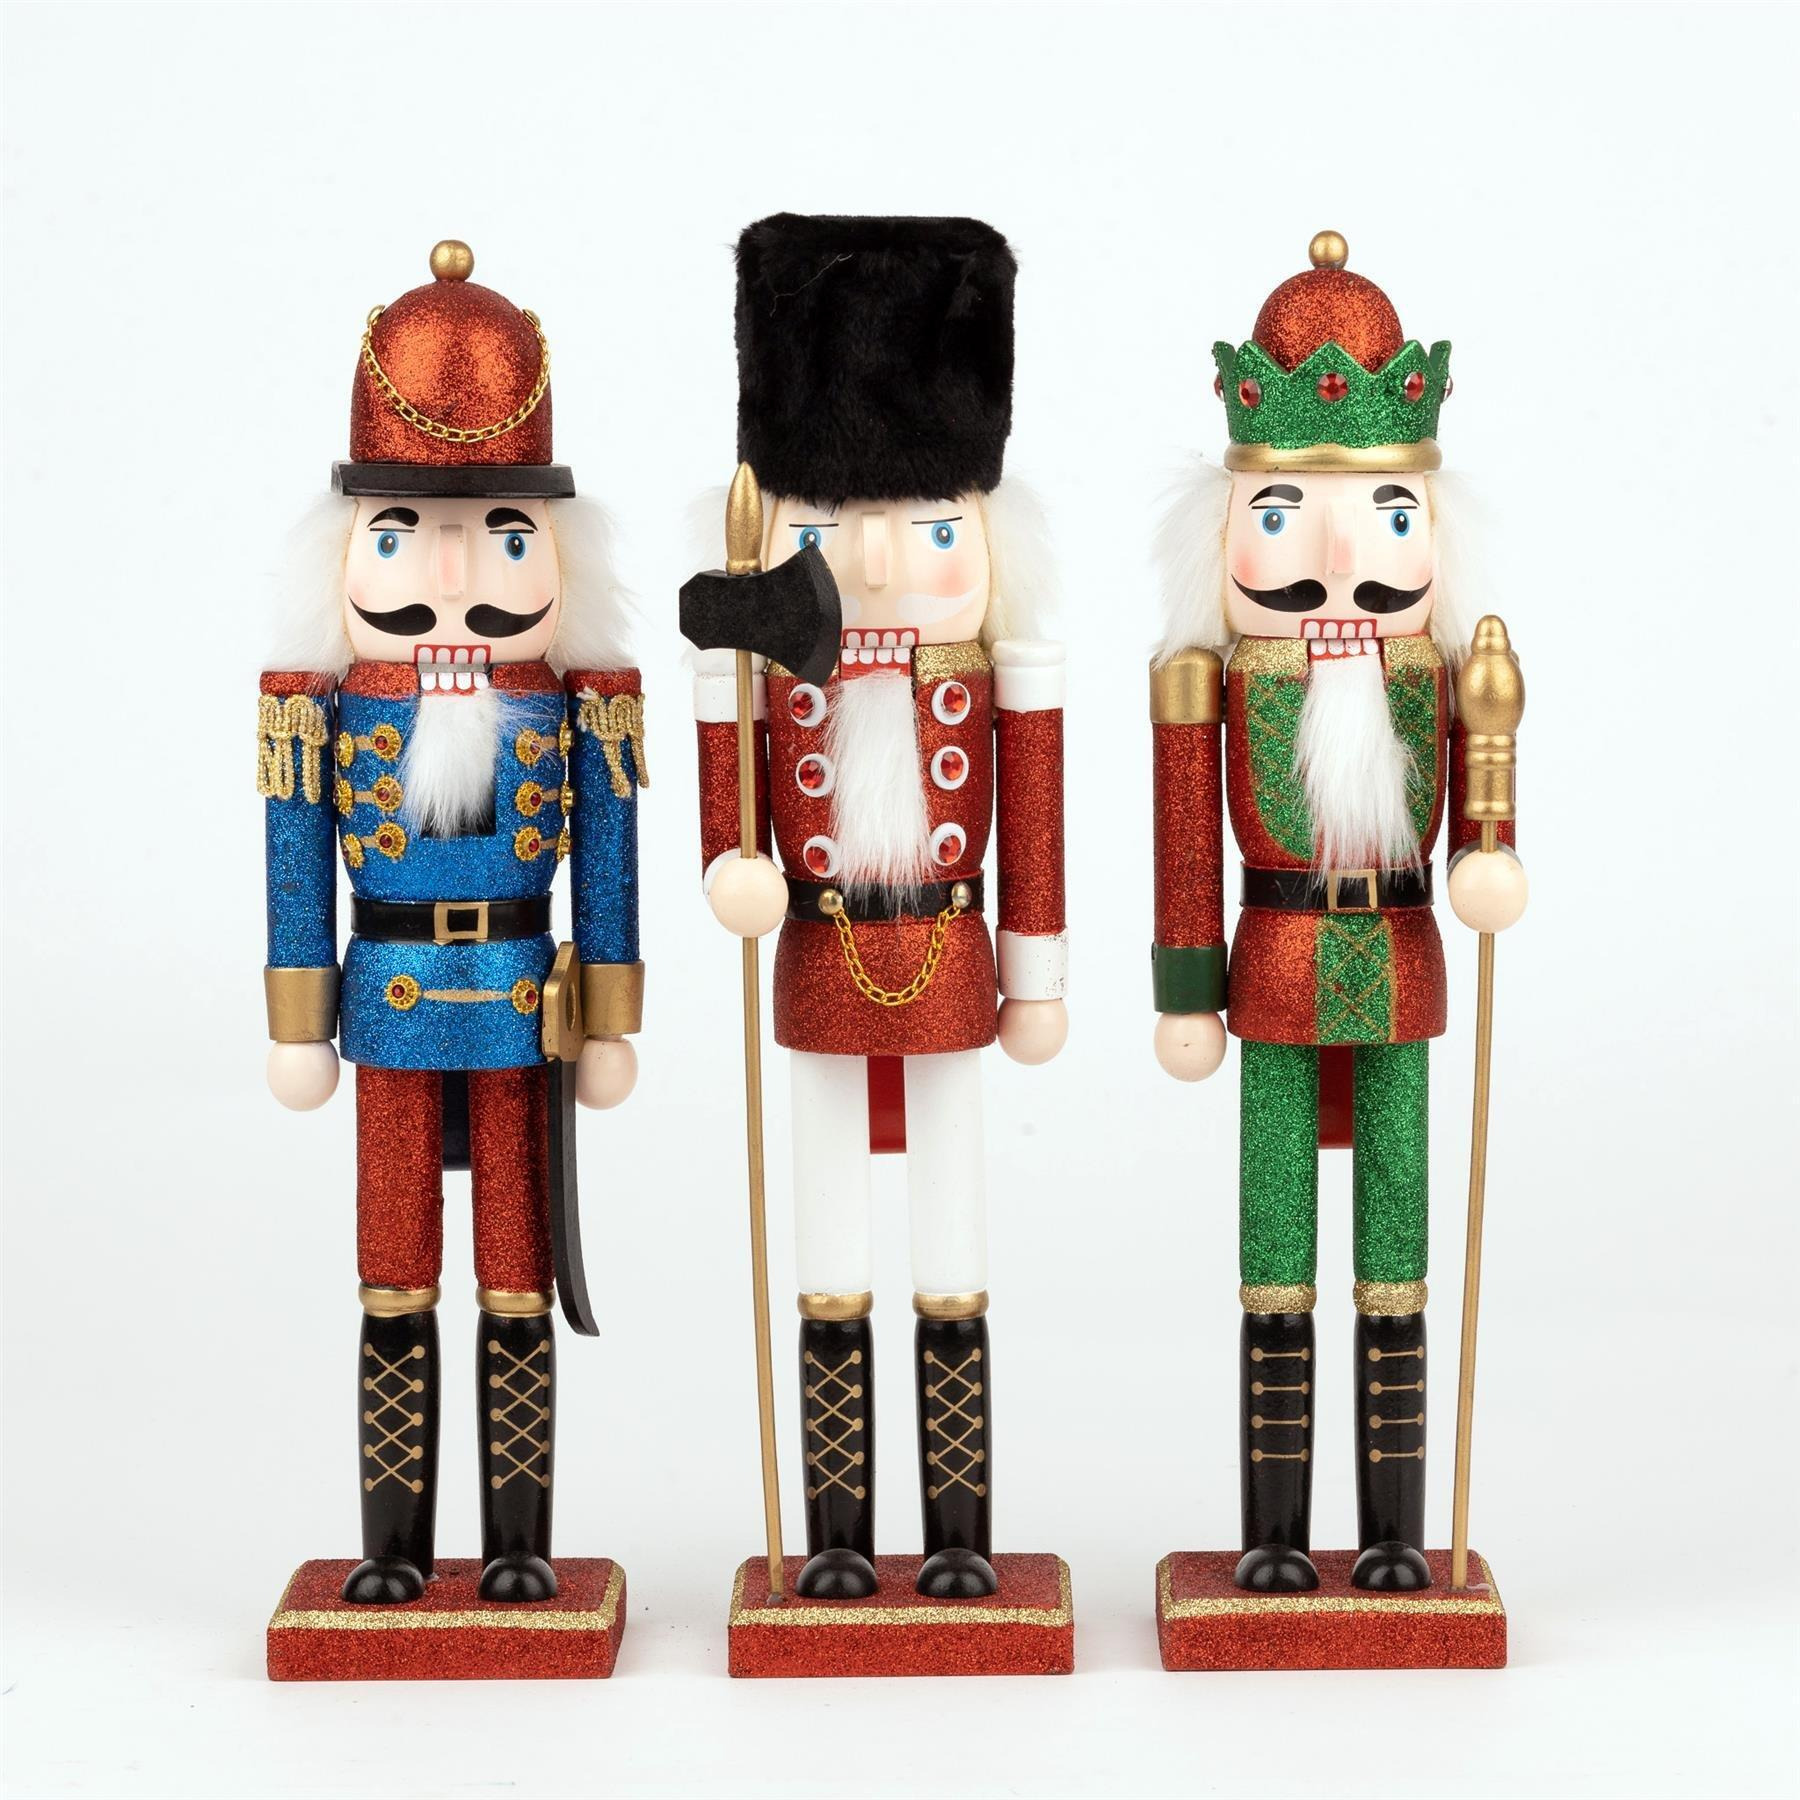 38cm Wooden Nutcrackers Figures Christmas Ornament 3Pcs Set Red Green and Blue - image 1